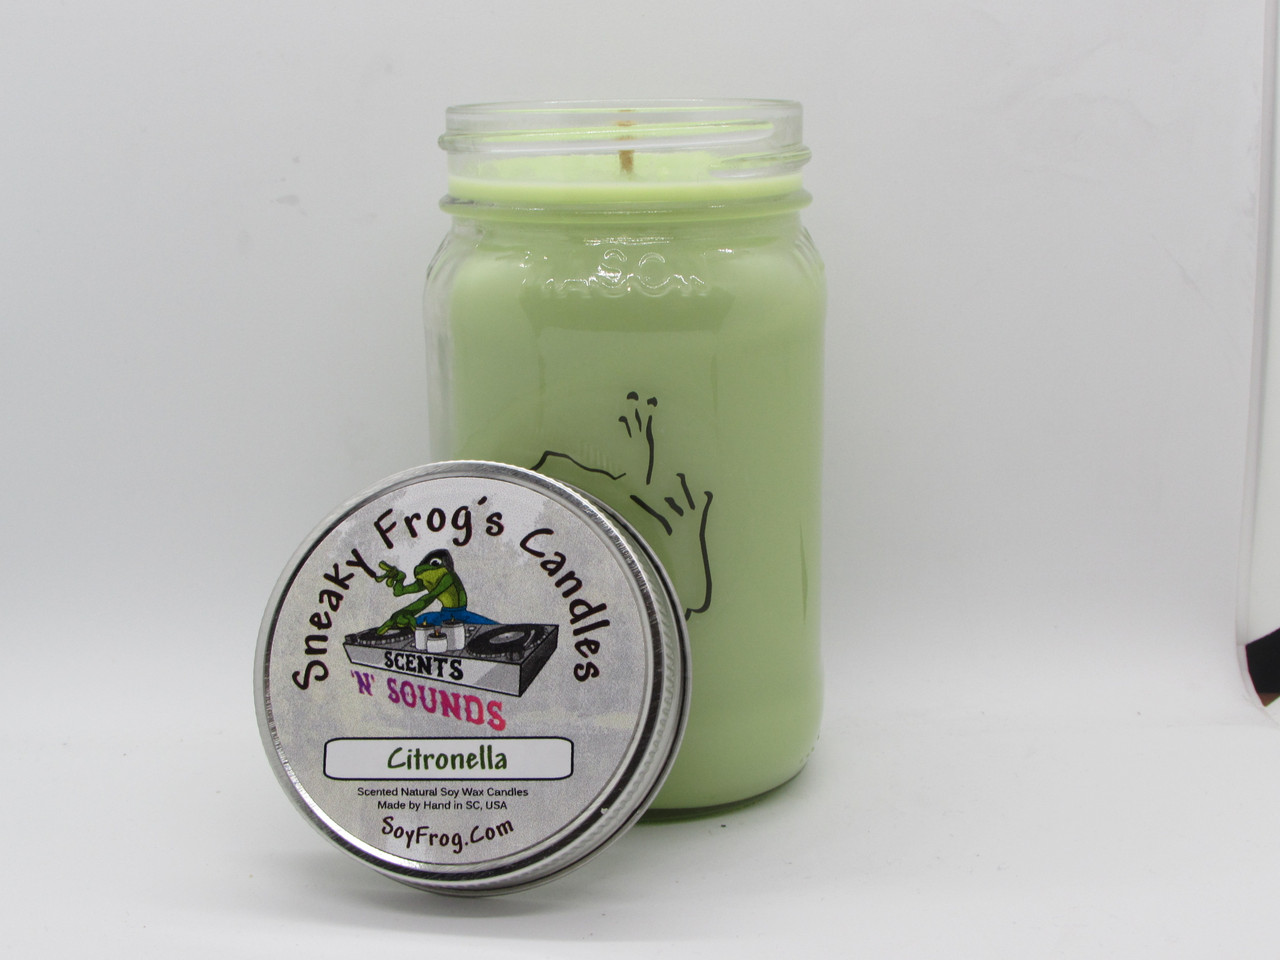 Citronella -- Sneaky Frog's Candles 16 Ounce Mason Jar, Green